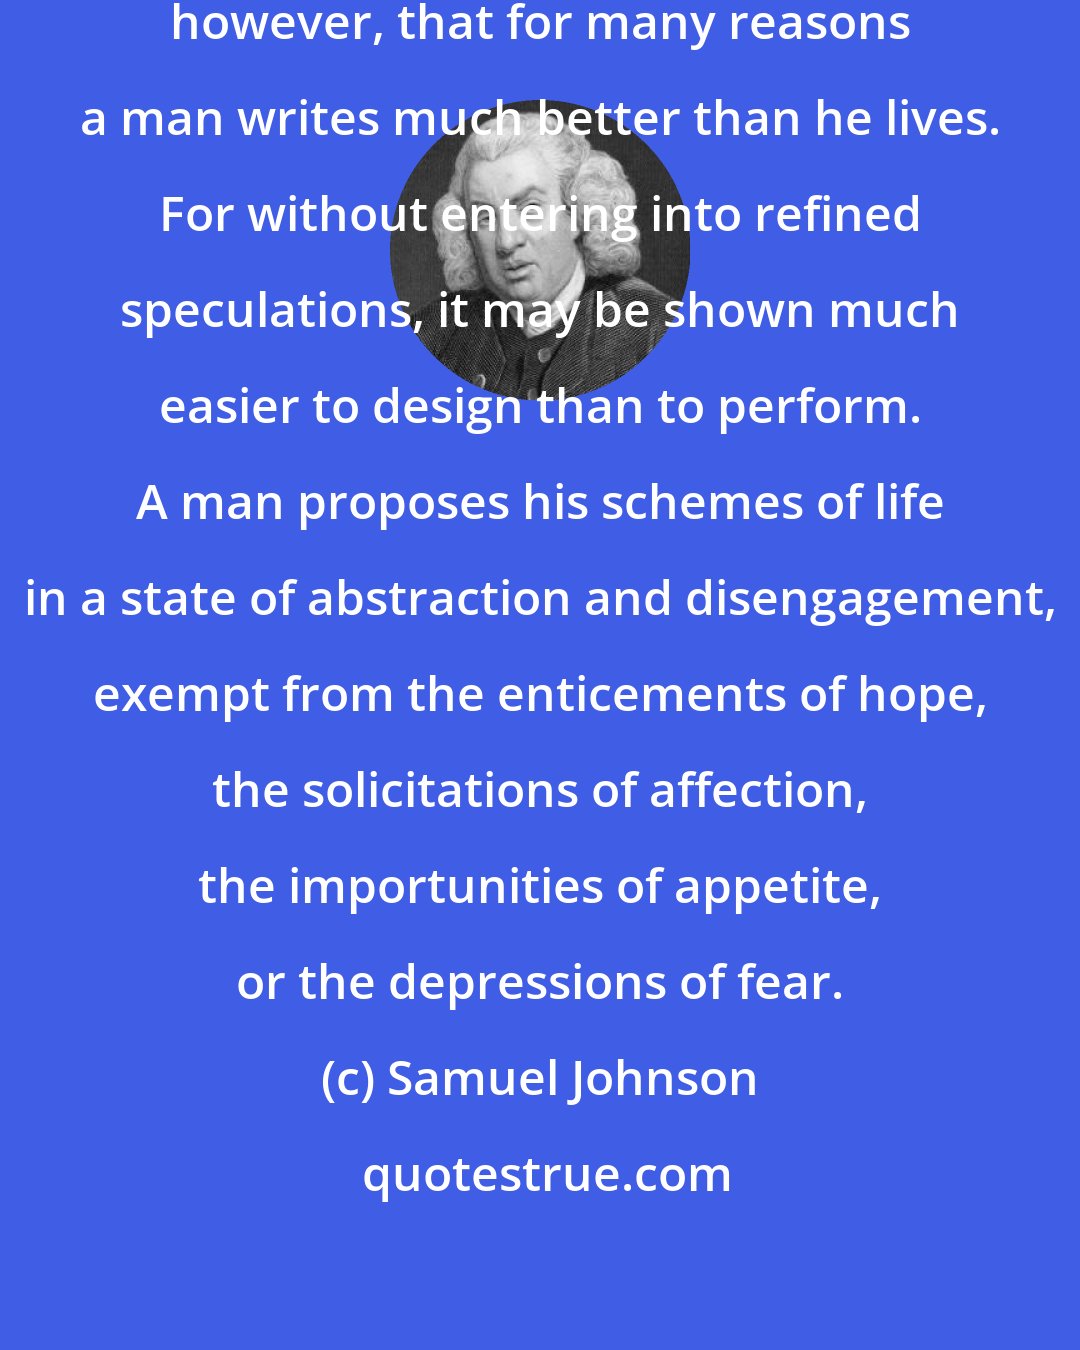 Samuel Johnson: It is not difficult to conceive, however, that for many reasons a man writes much better than he lives. For without entering into refined speculations, it may be shown much easier to design than to perform. A man proposes his schemes of life in a state of abstraction and disengagement, exempt from the enticements of hope, the solicitations of affection, the importunities of appetite, or the depressions of fear.